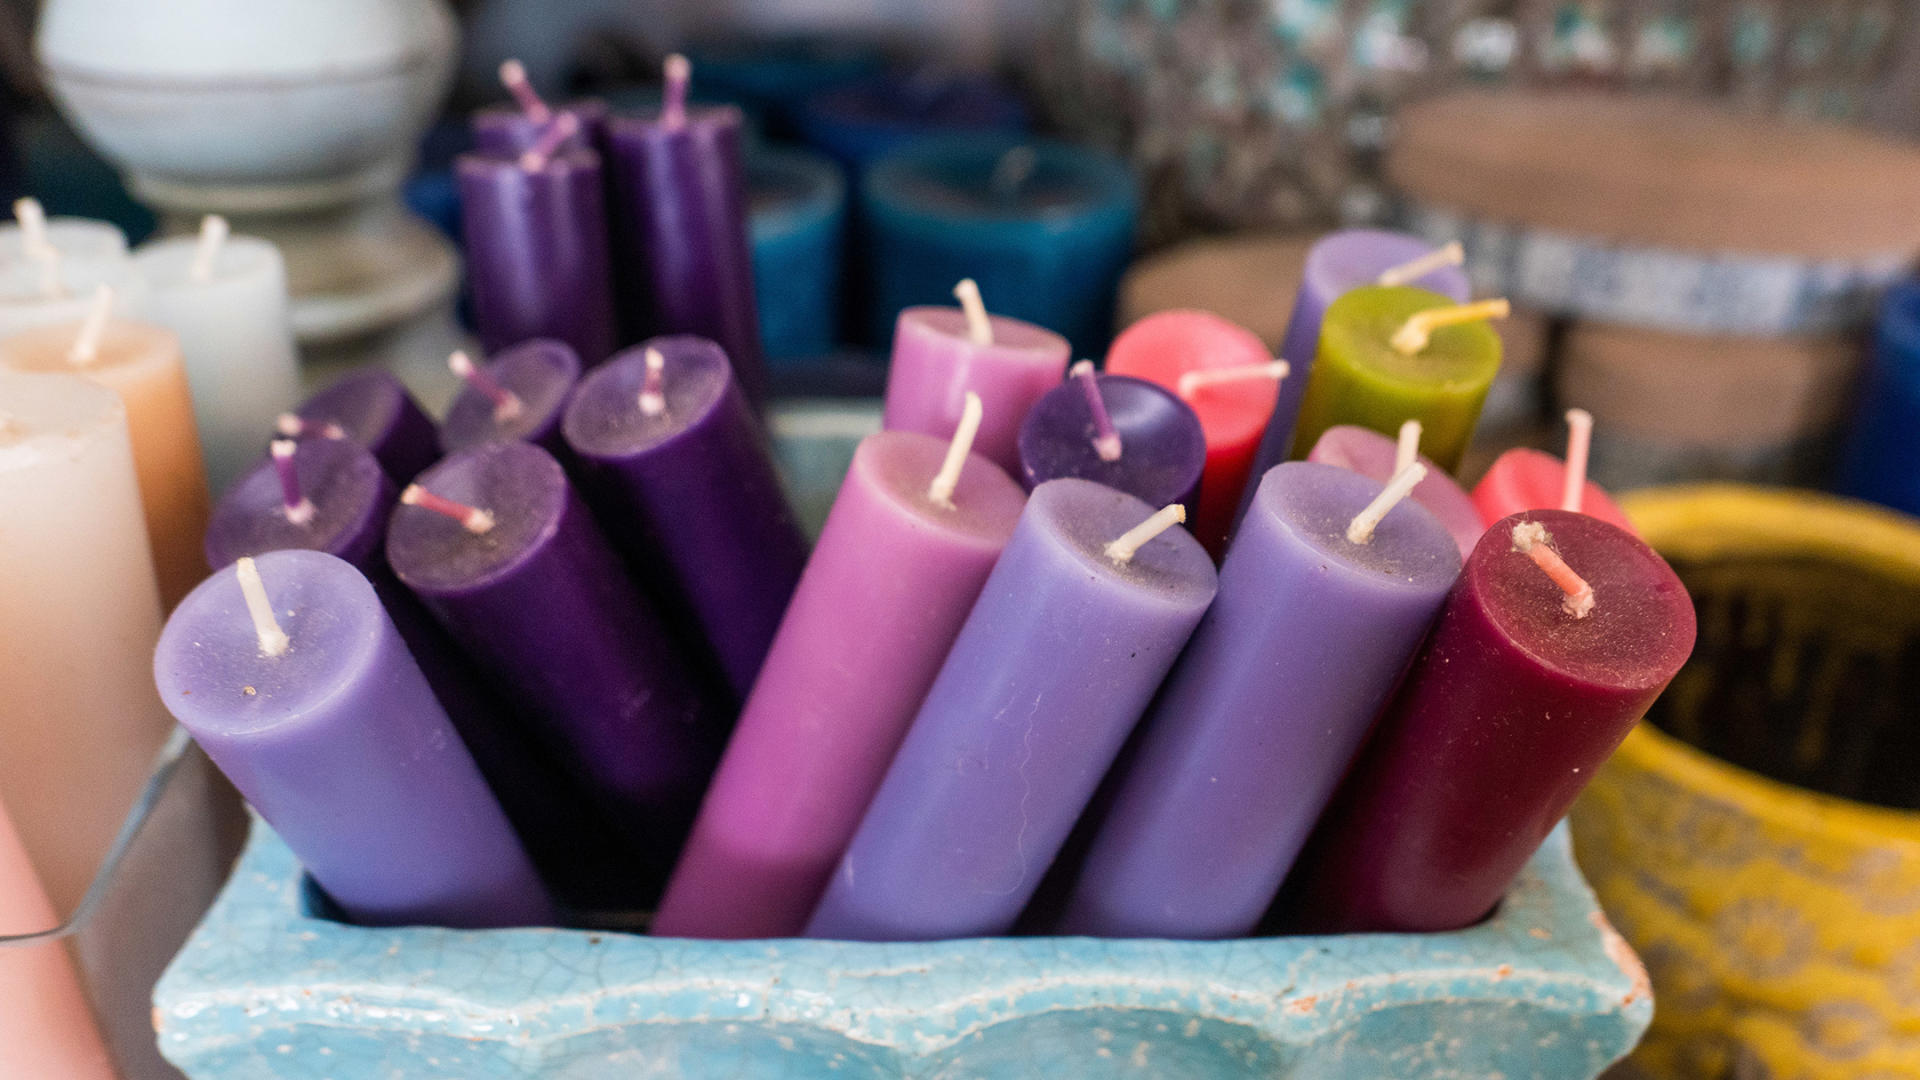 Coloured candles in a ceramic holder